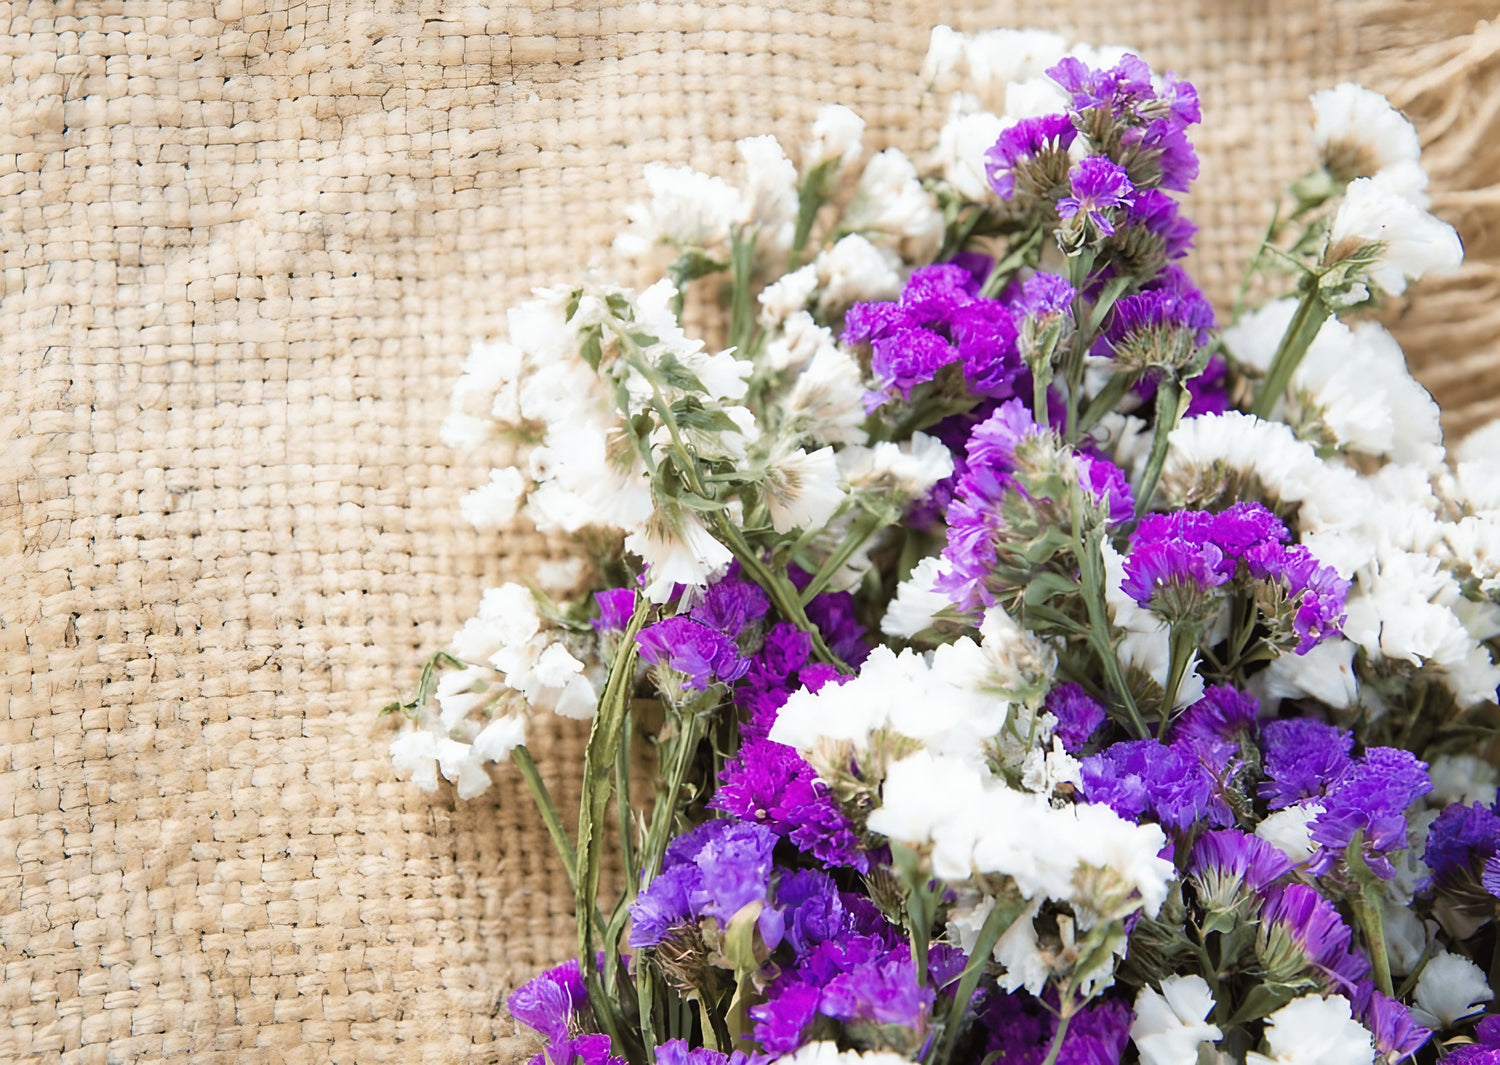 Statice Mixed flowers arranged on a burlap cloth, with a focus on the purple and white blooms